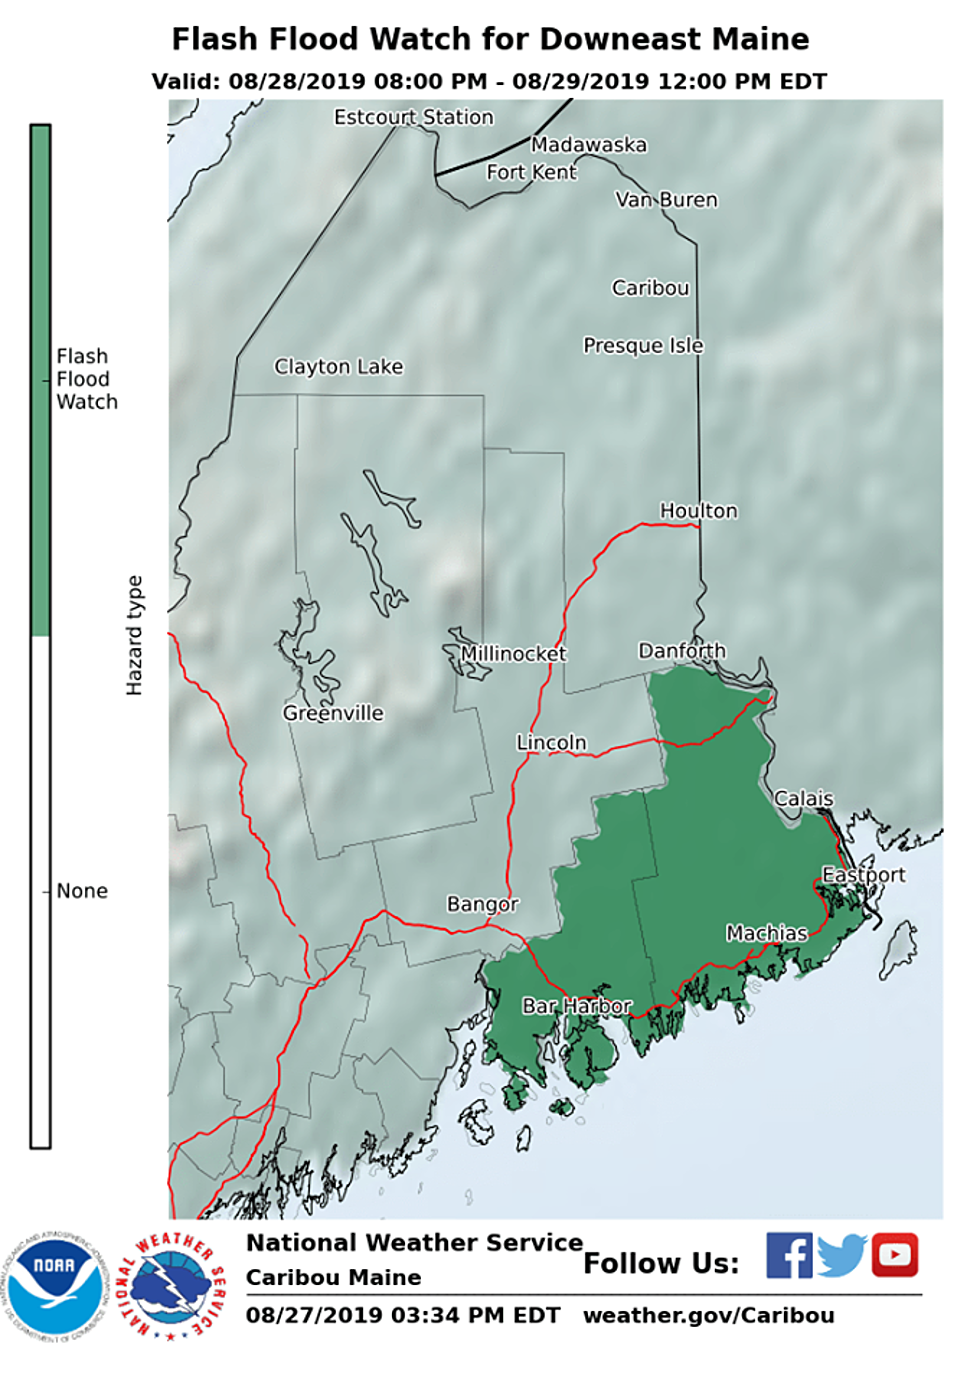 Flash Flood Watch for Downeast Maine Wednesday Evening-Thursday Morning